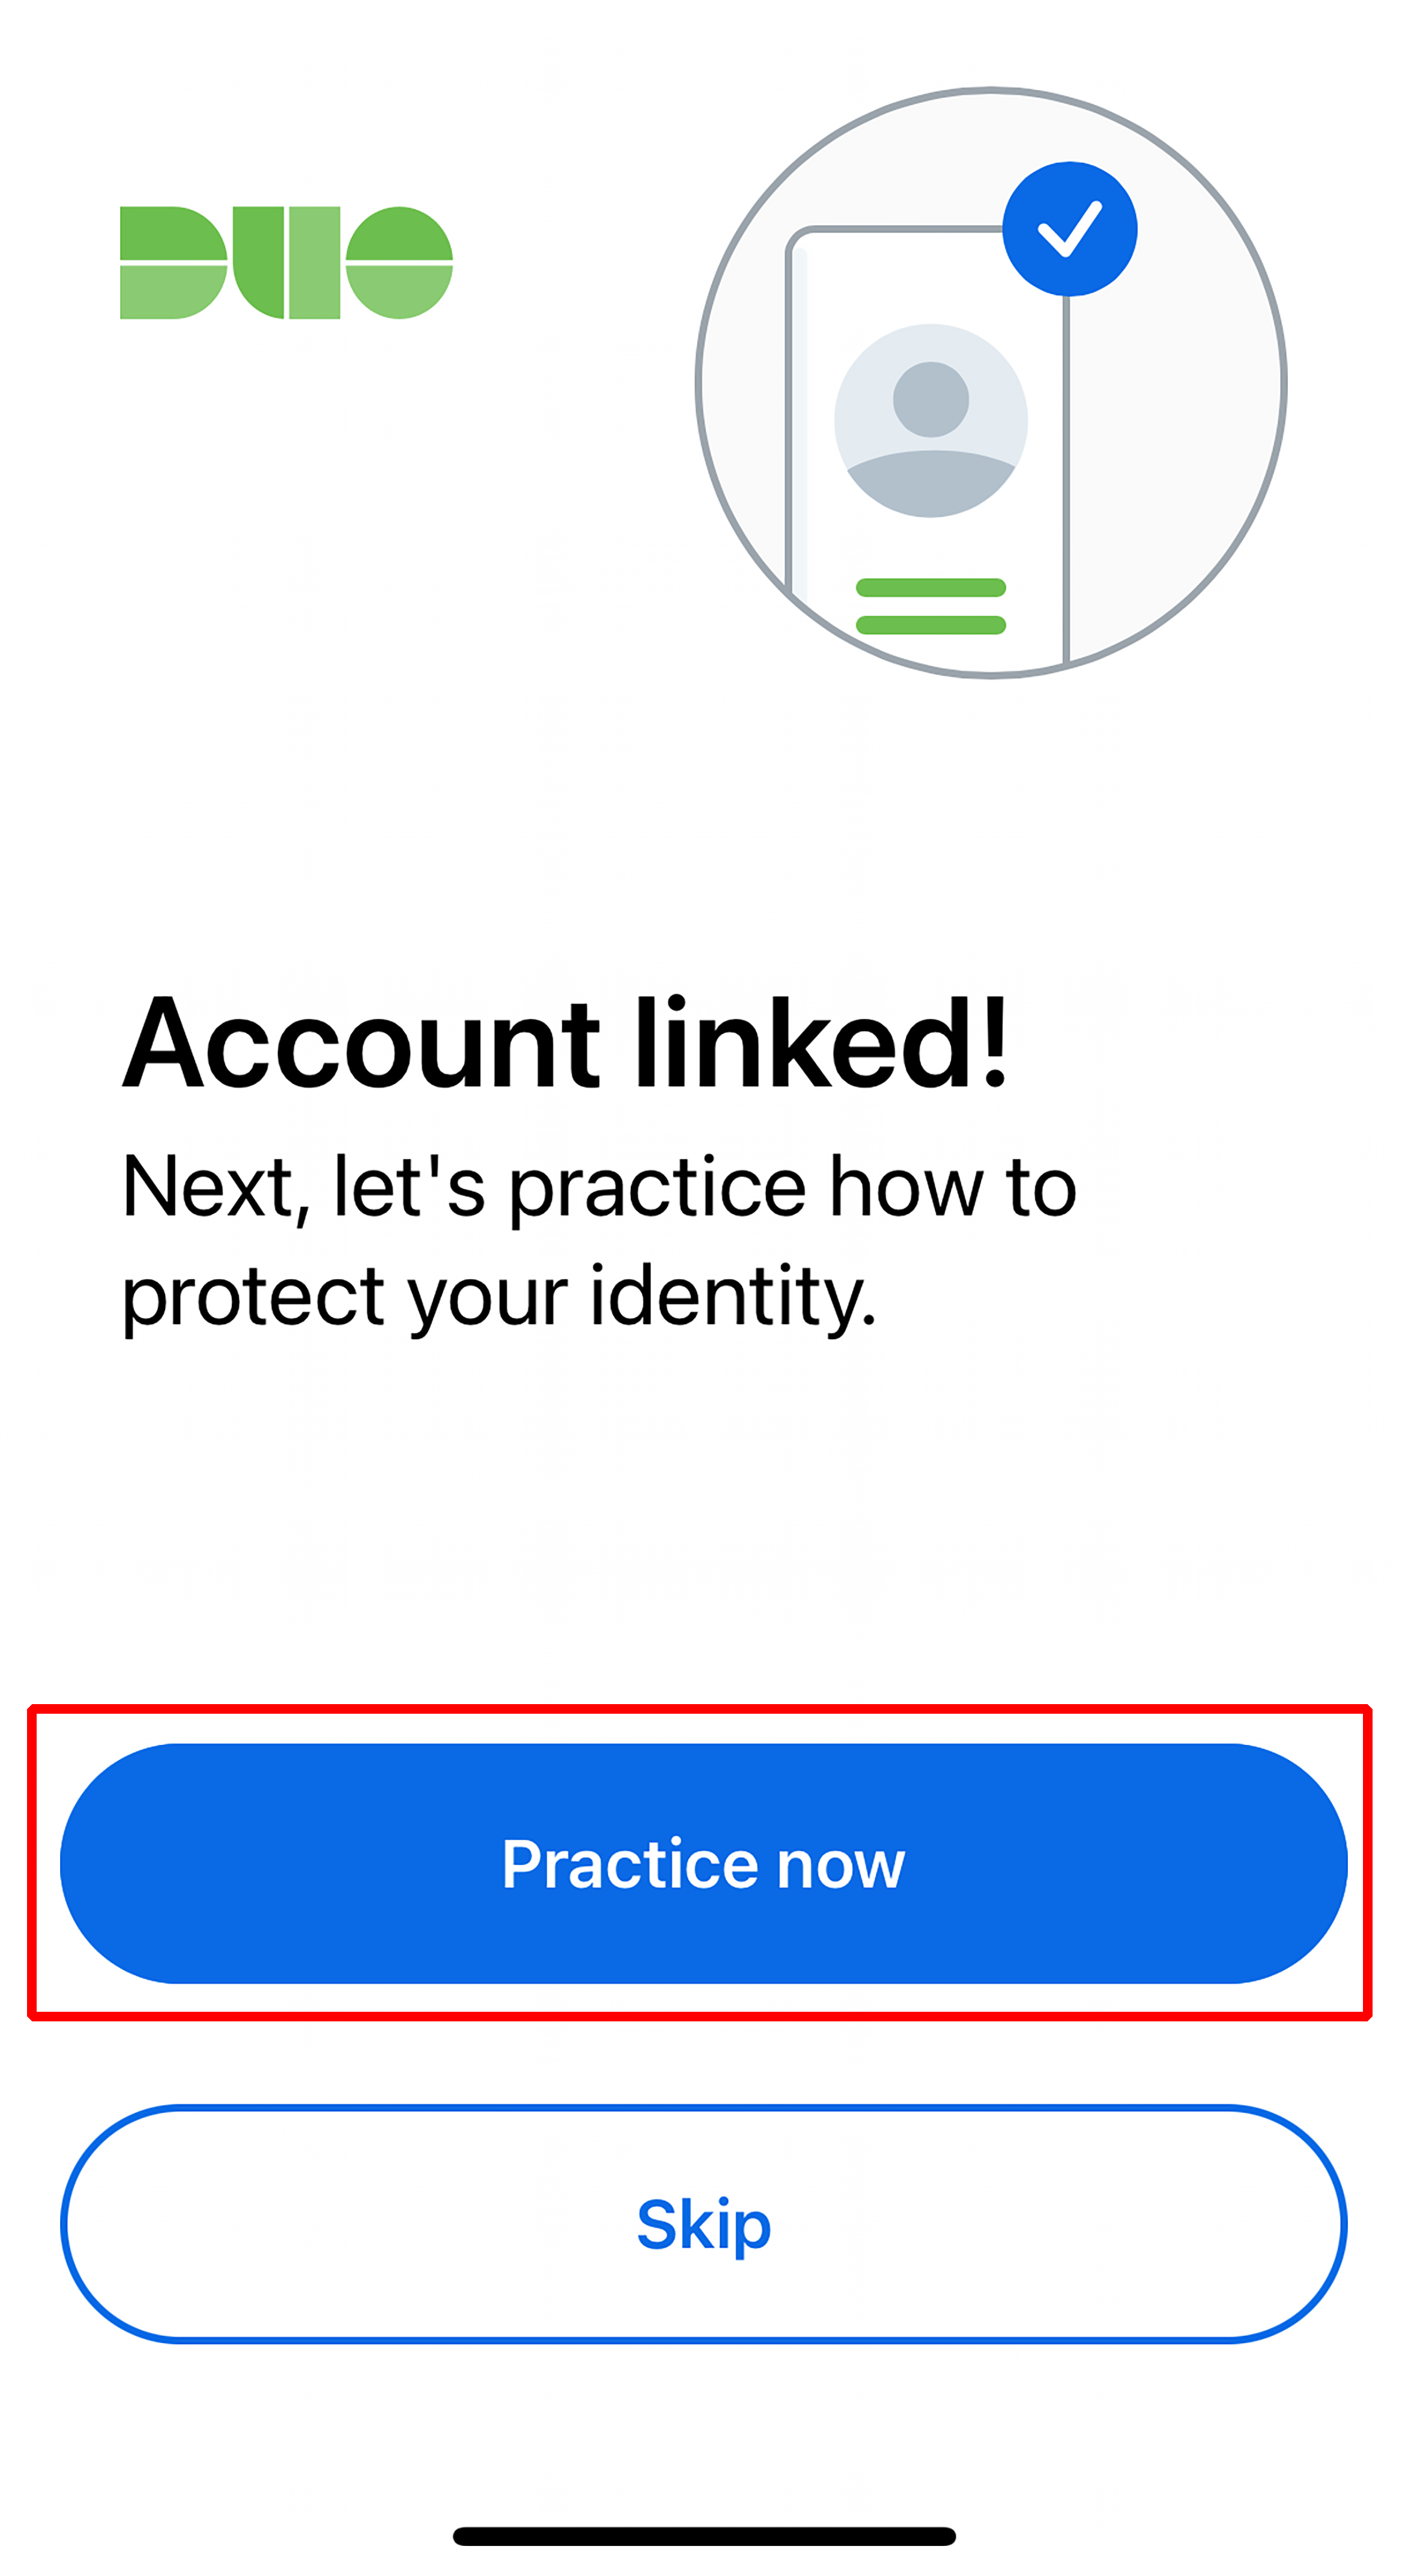 Account linked confirmation shown with Practice now button highlighted.